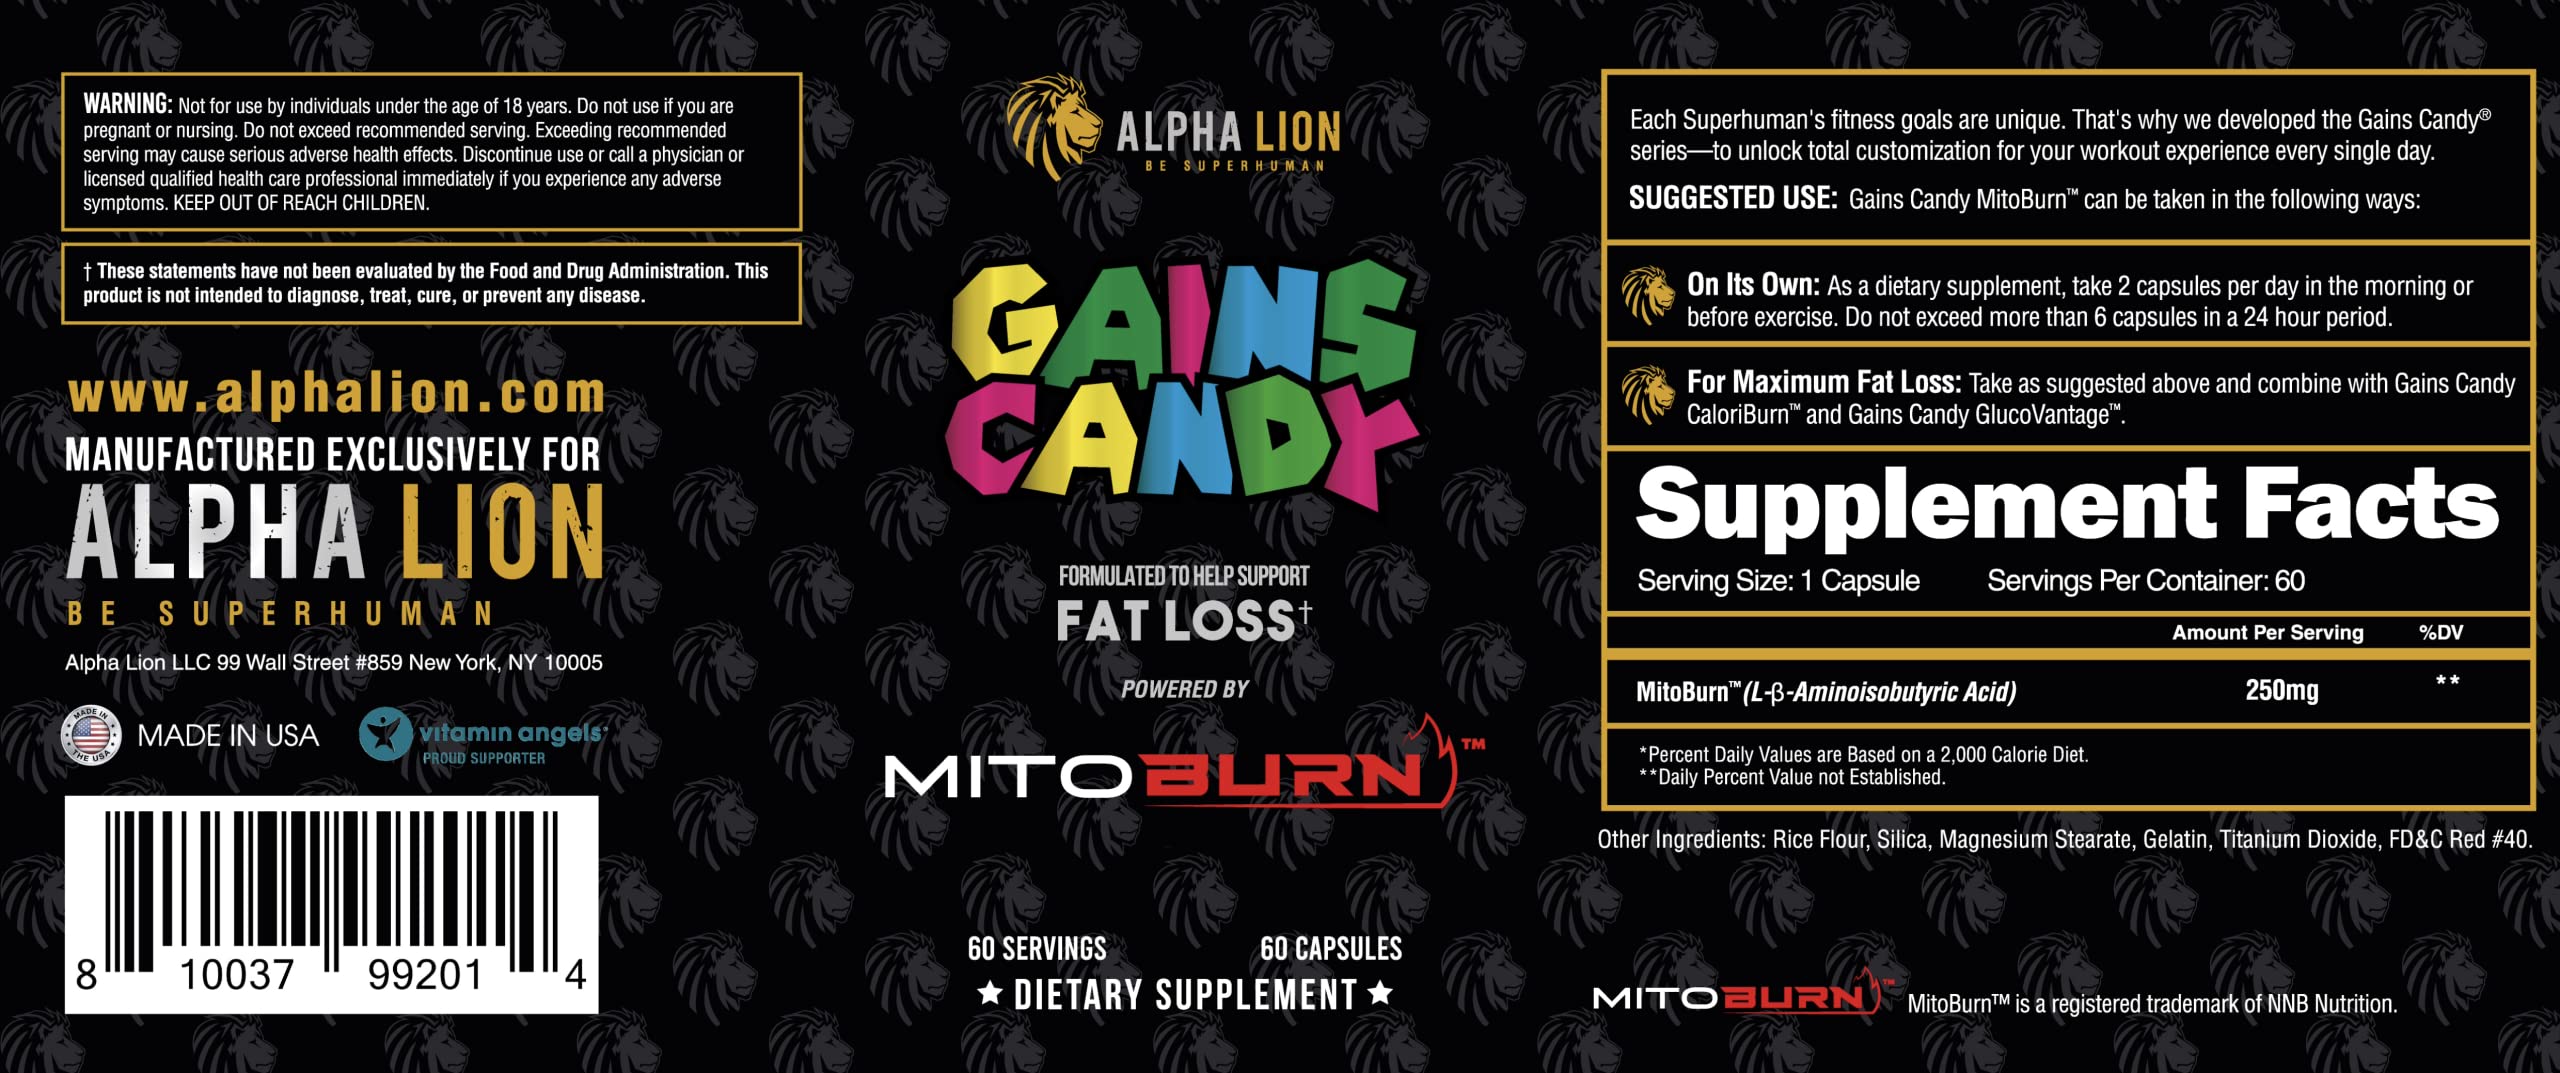 ALPHA LION Gains Candy, Supplement Pills That Support Weight Loss, Appetite Suppressant, Keto-Diet Friendly, Decrease Body Fat, Upgrade Energy & Workout Performance, 60 Capsules (MitoBurn®)